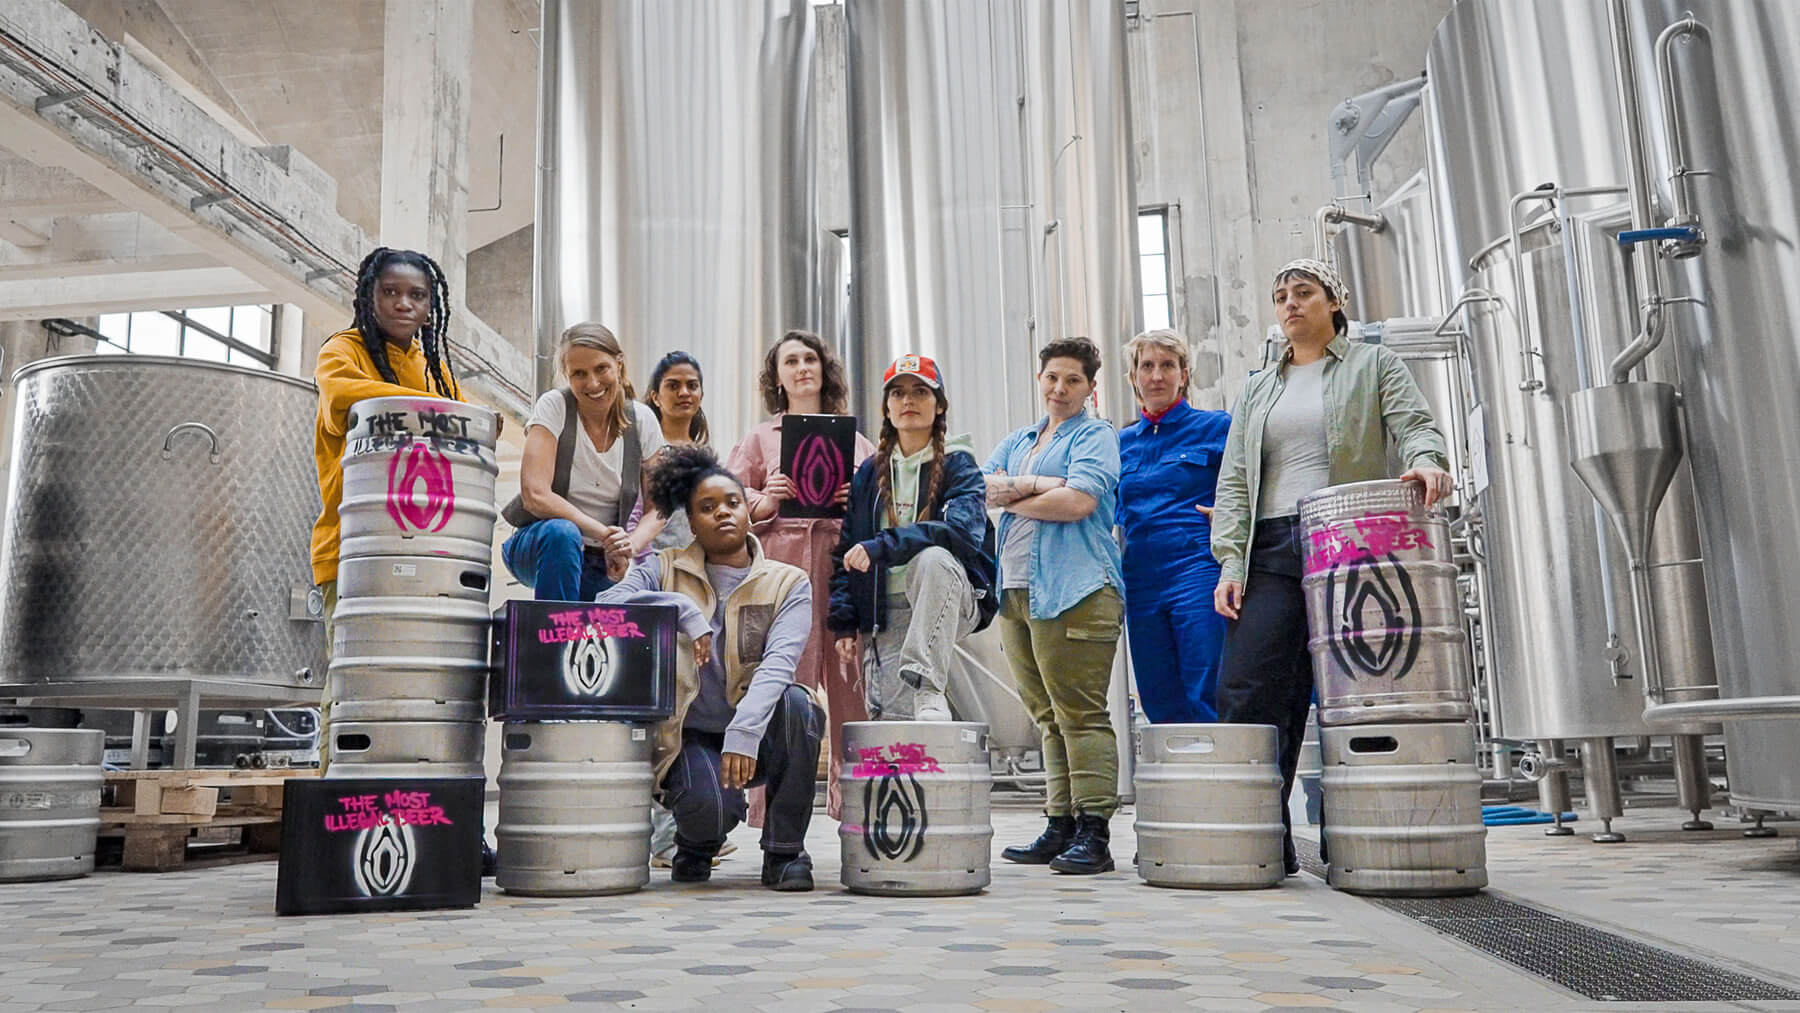 Muschicraft, The Most Illegal Beer, Campaigns of the world, Gender Equality